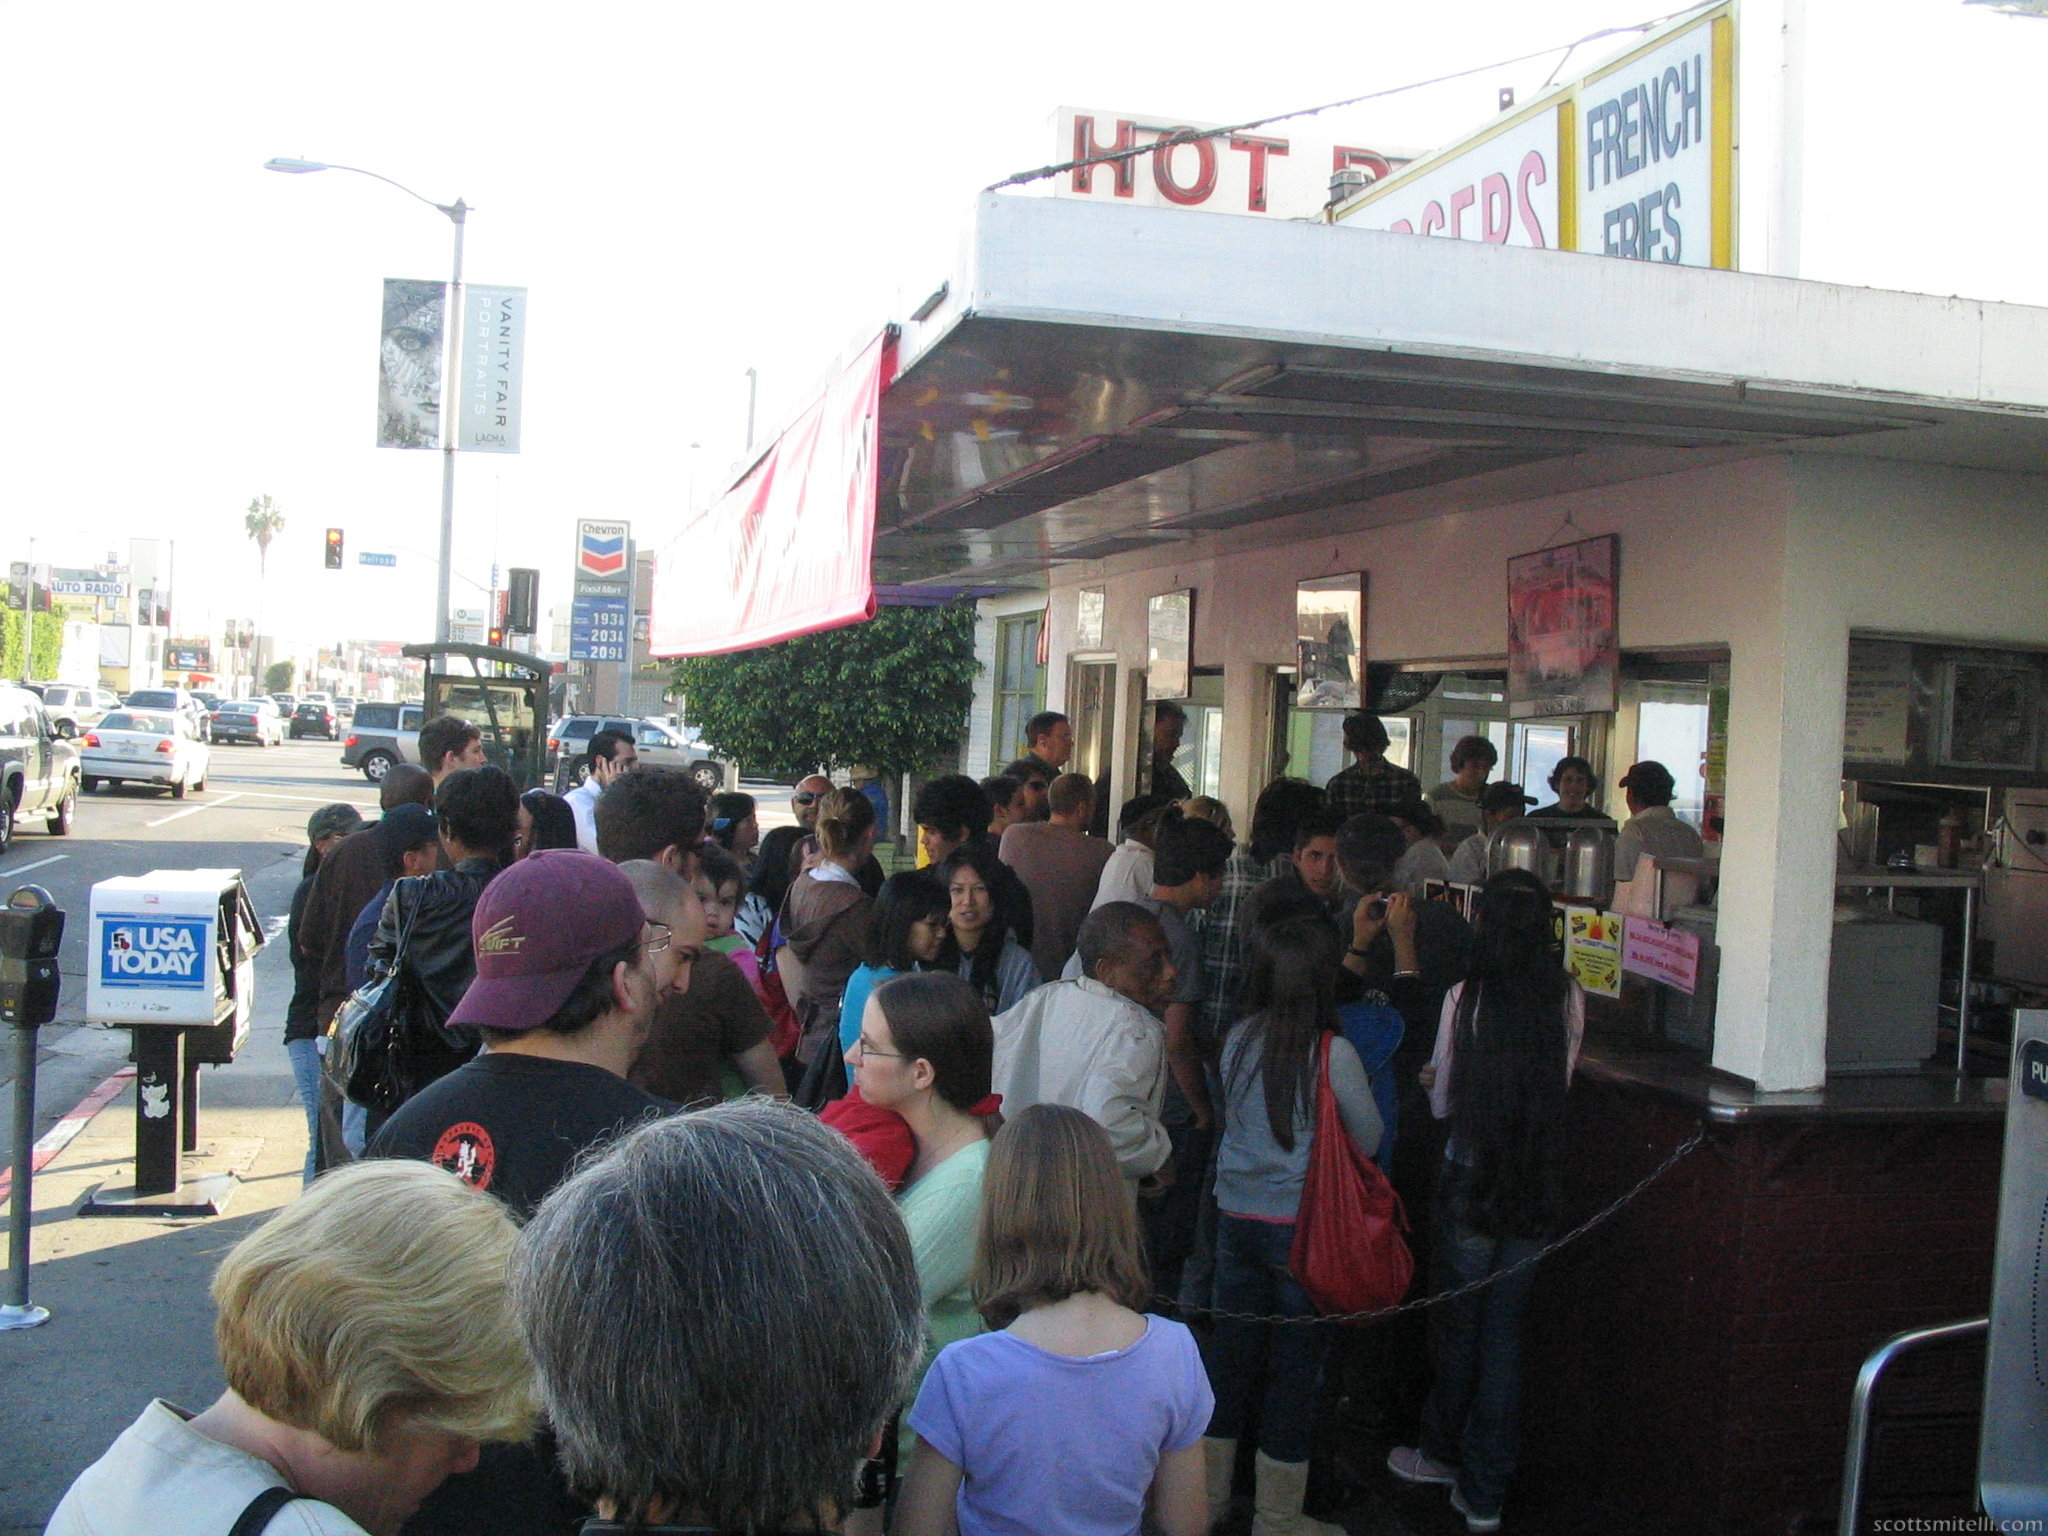 This is a hot dog line.